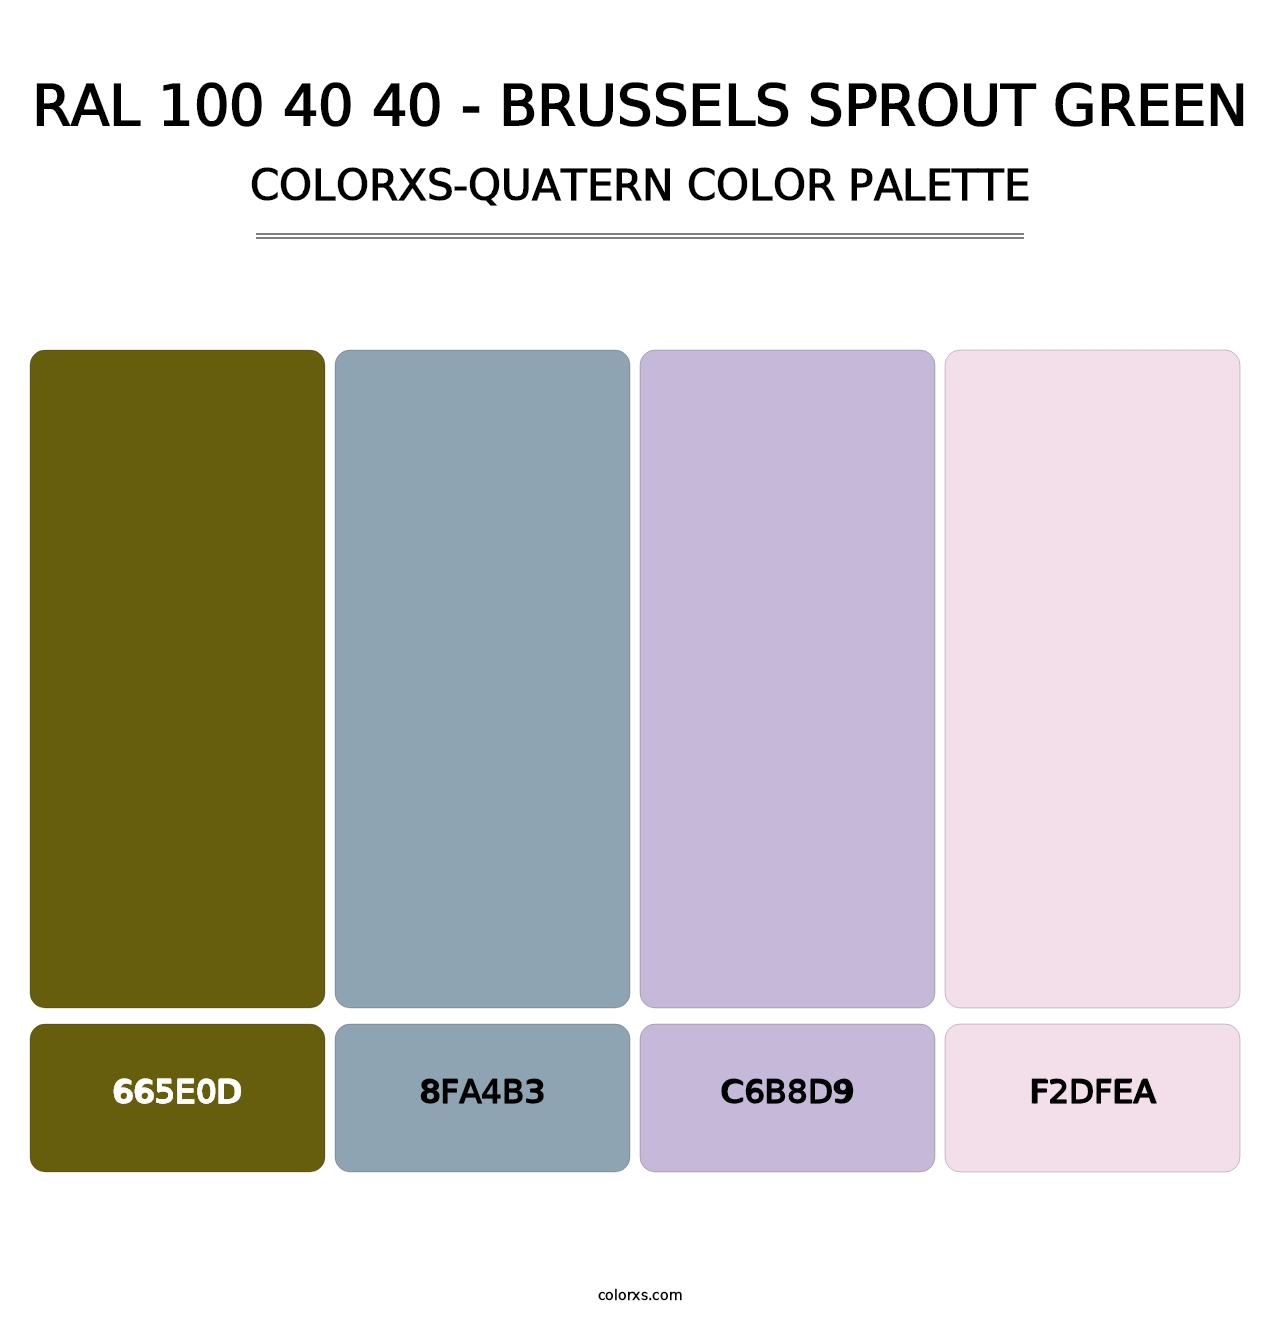 RAL 100 40 40 - Brussels Sprout Green - Colorxs Quatern Palette